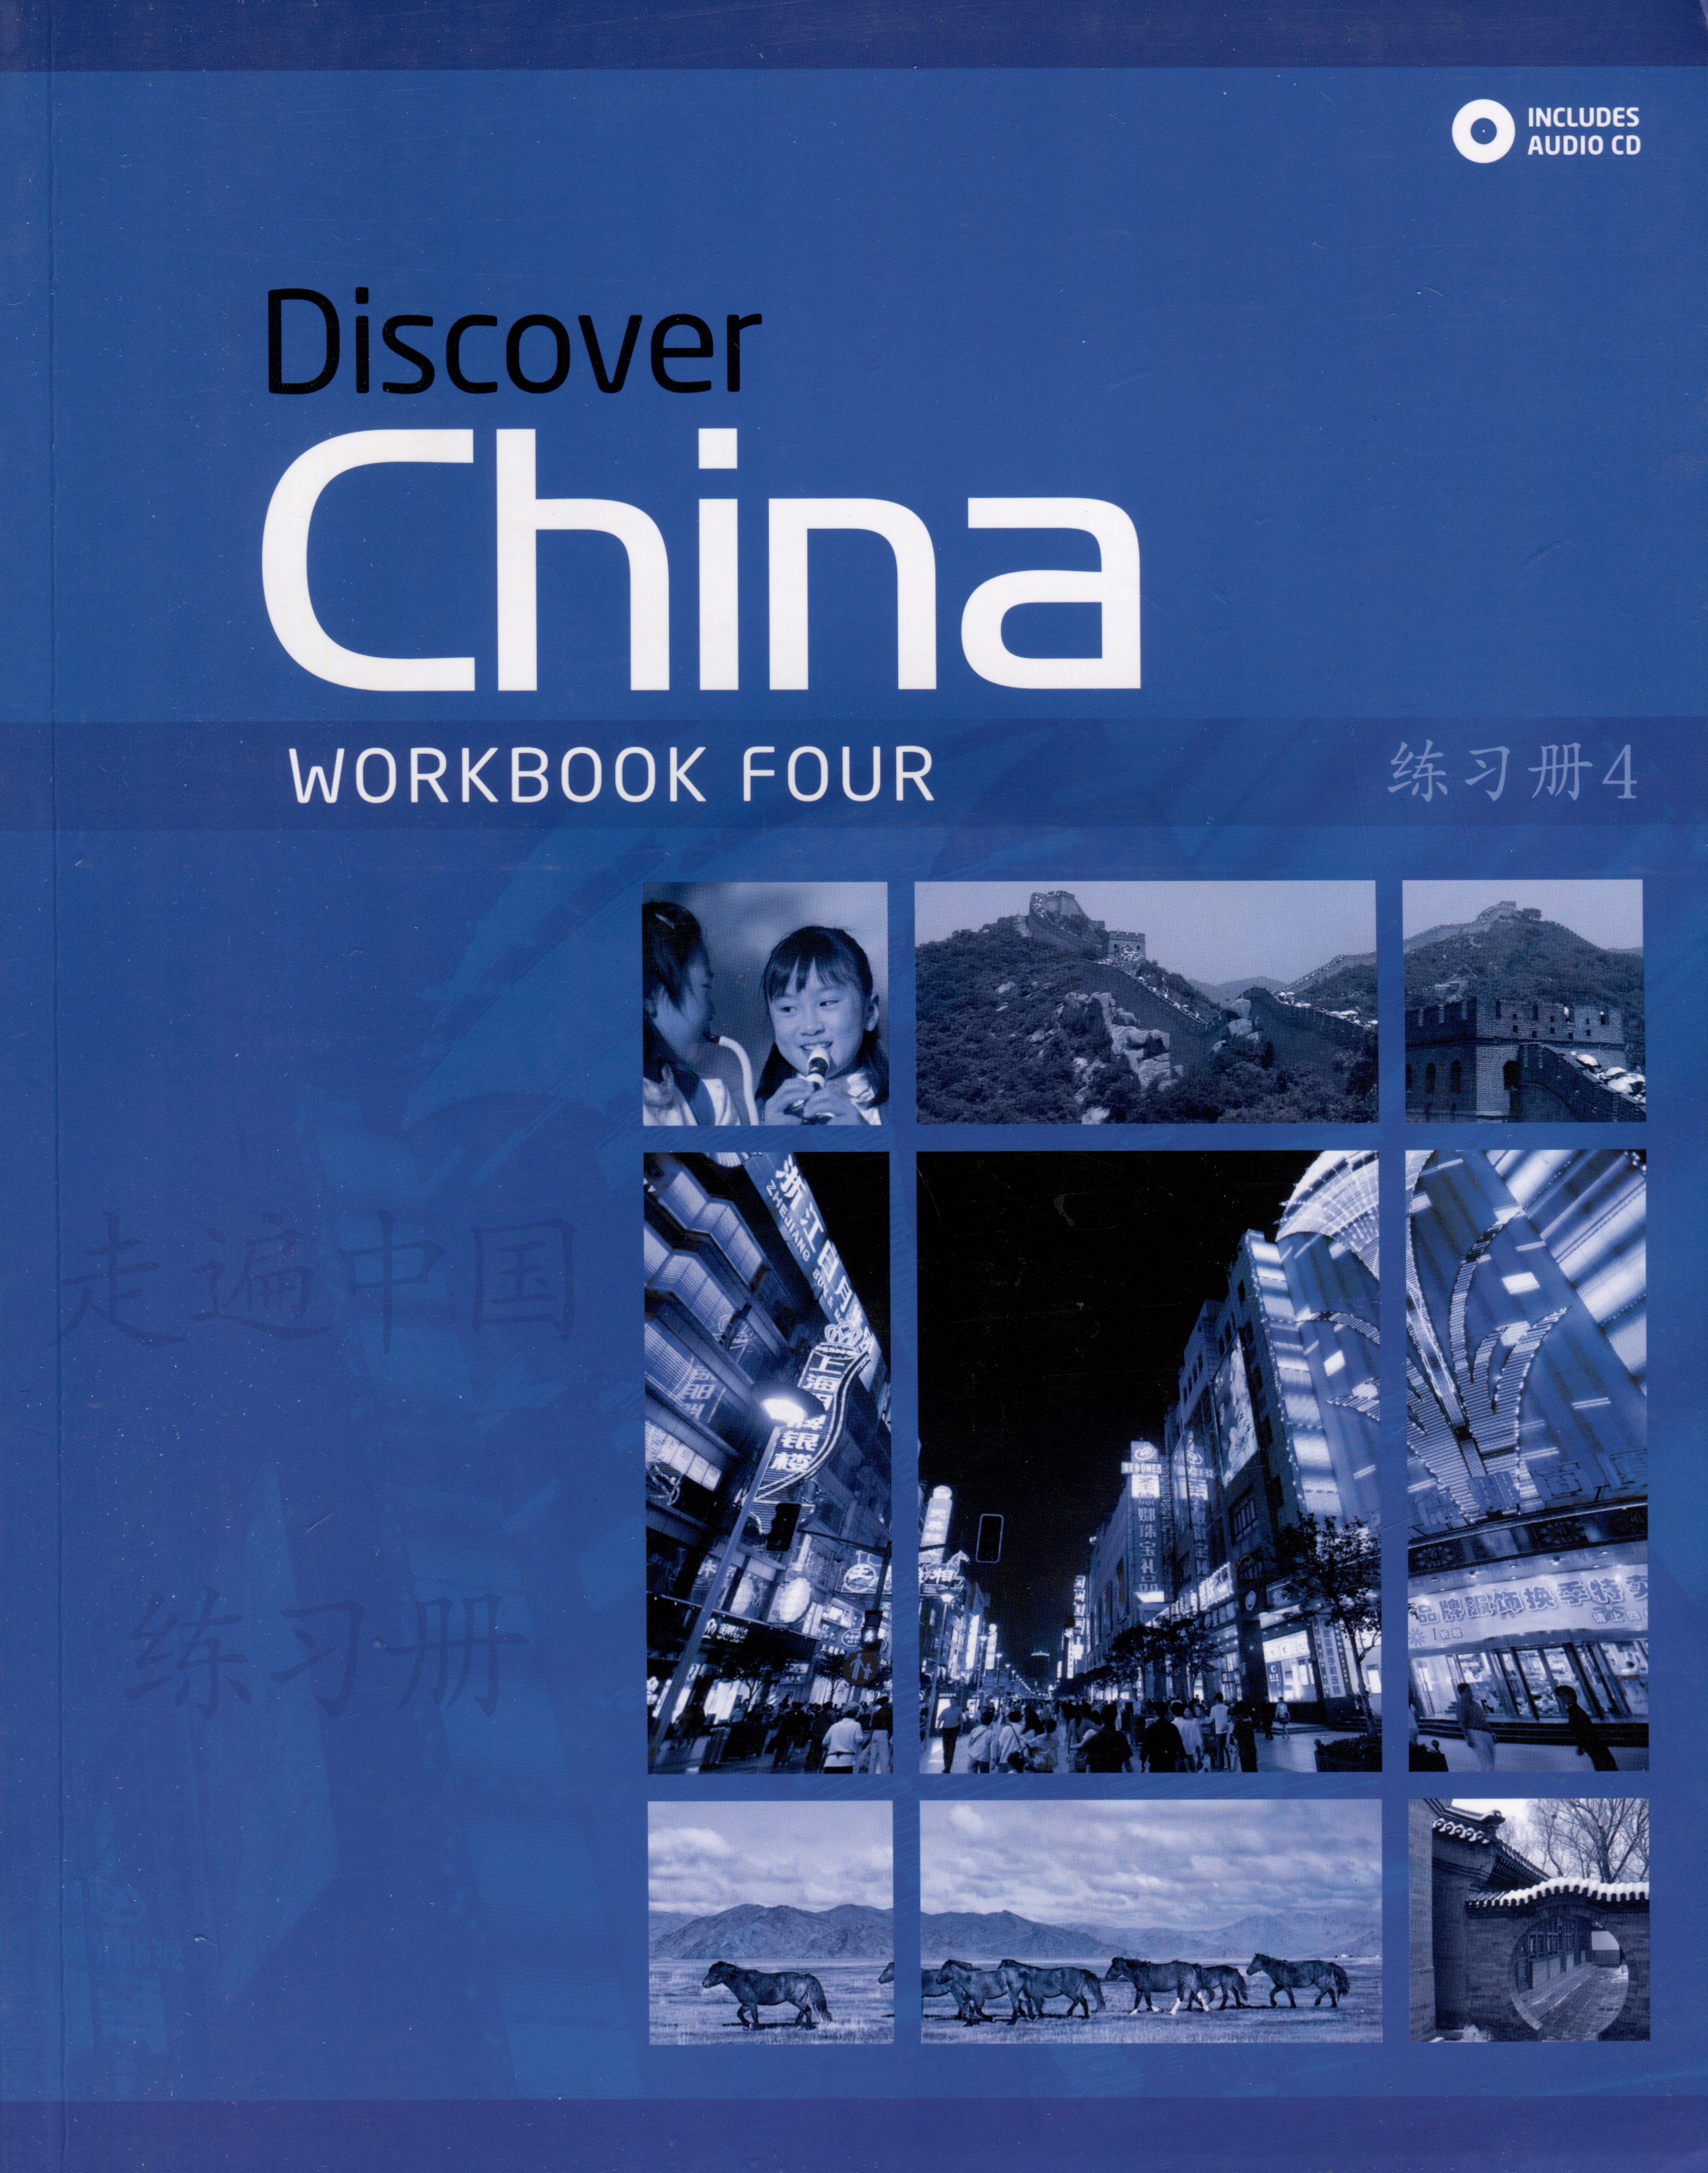 Discover China 4 Workbook Four +Audio CD